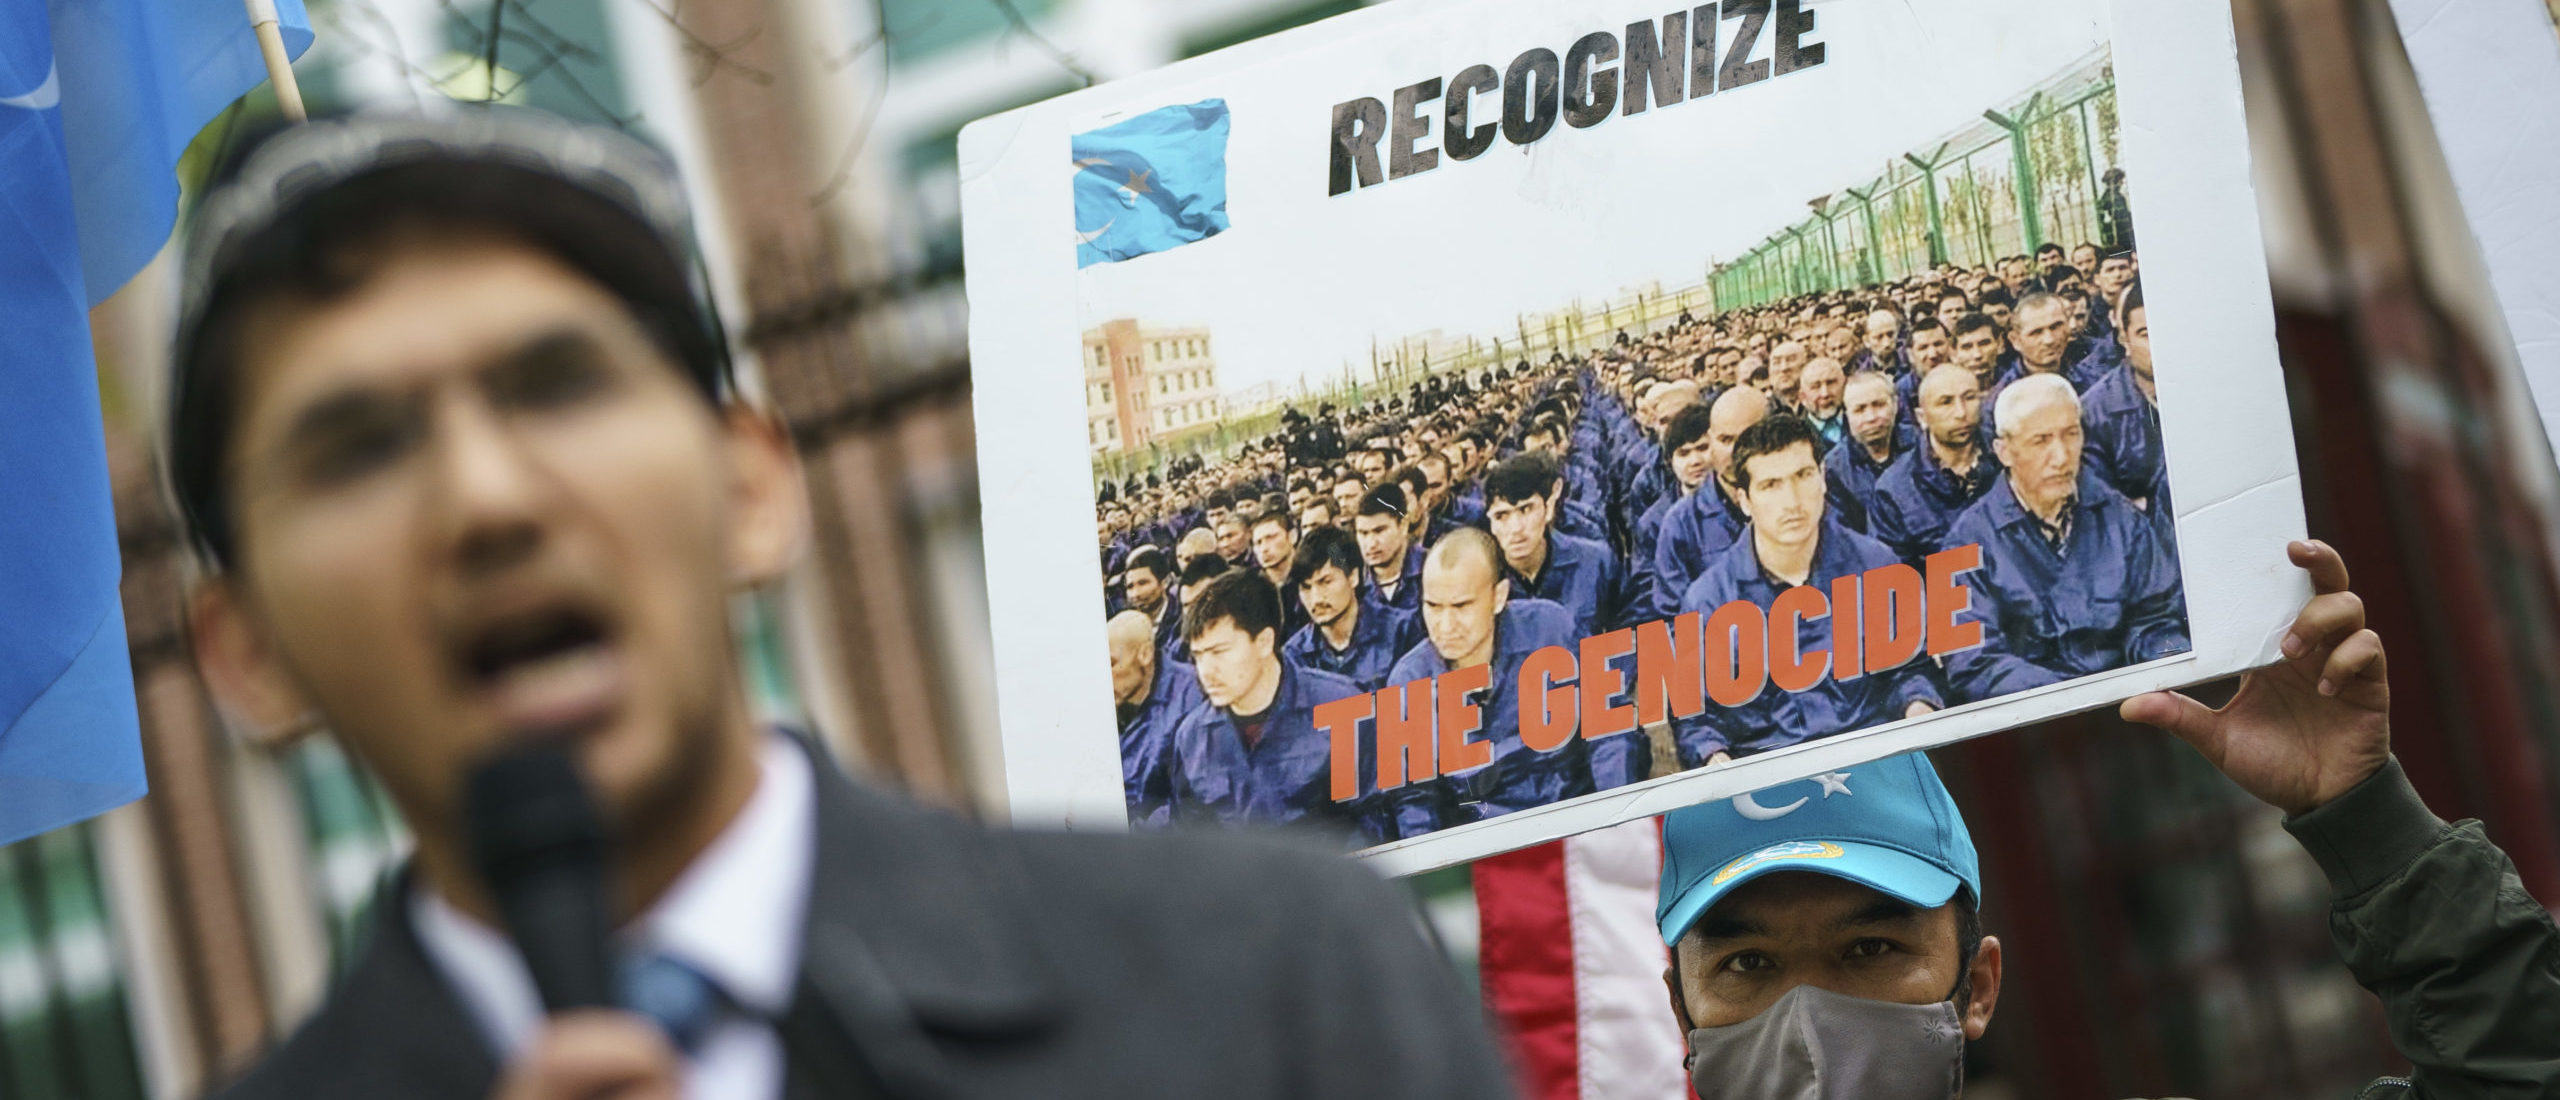 Hundreds of human rights groups and at least eight governmental bodies have determined China is responsible for committing atrocities against Uyghurs and other ethnic minorities. (Photo by Drew Angerer/Getty Images)